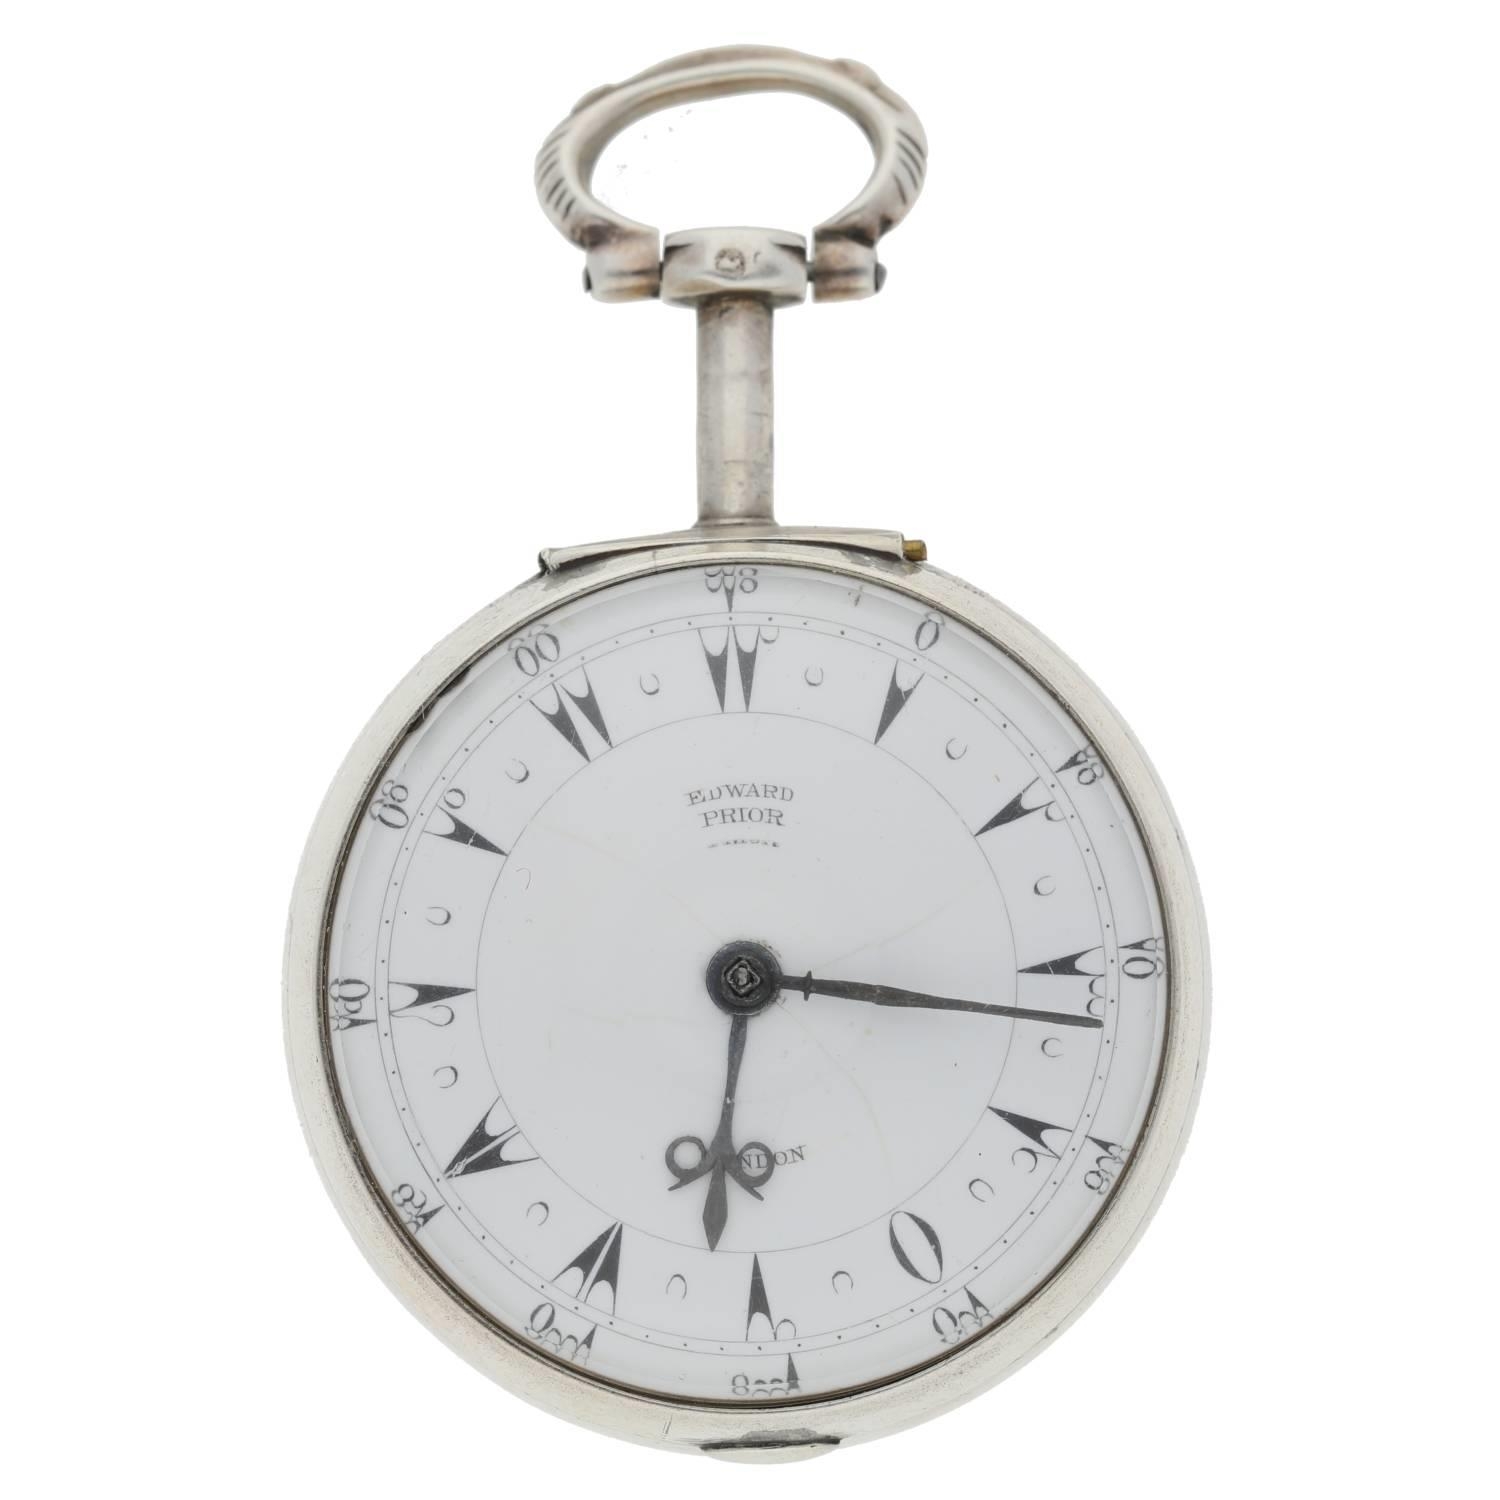 Edward Prior, London - 19th century silver pair cased verge pocket watch made for the Turkish - Image 3 of 10